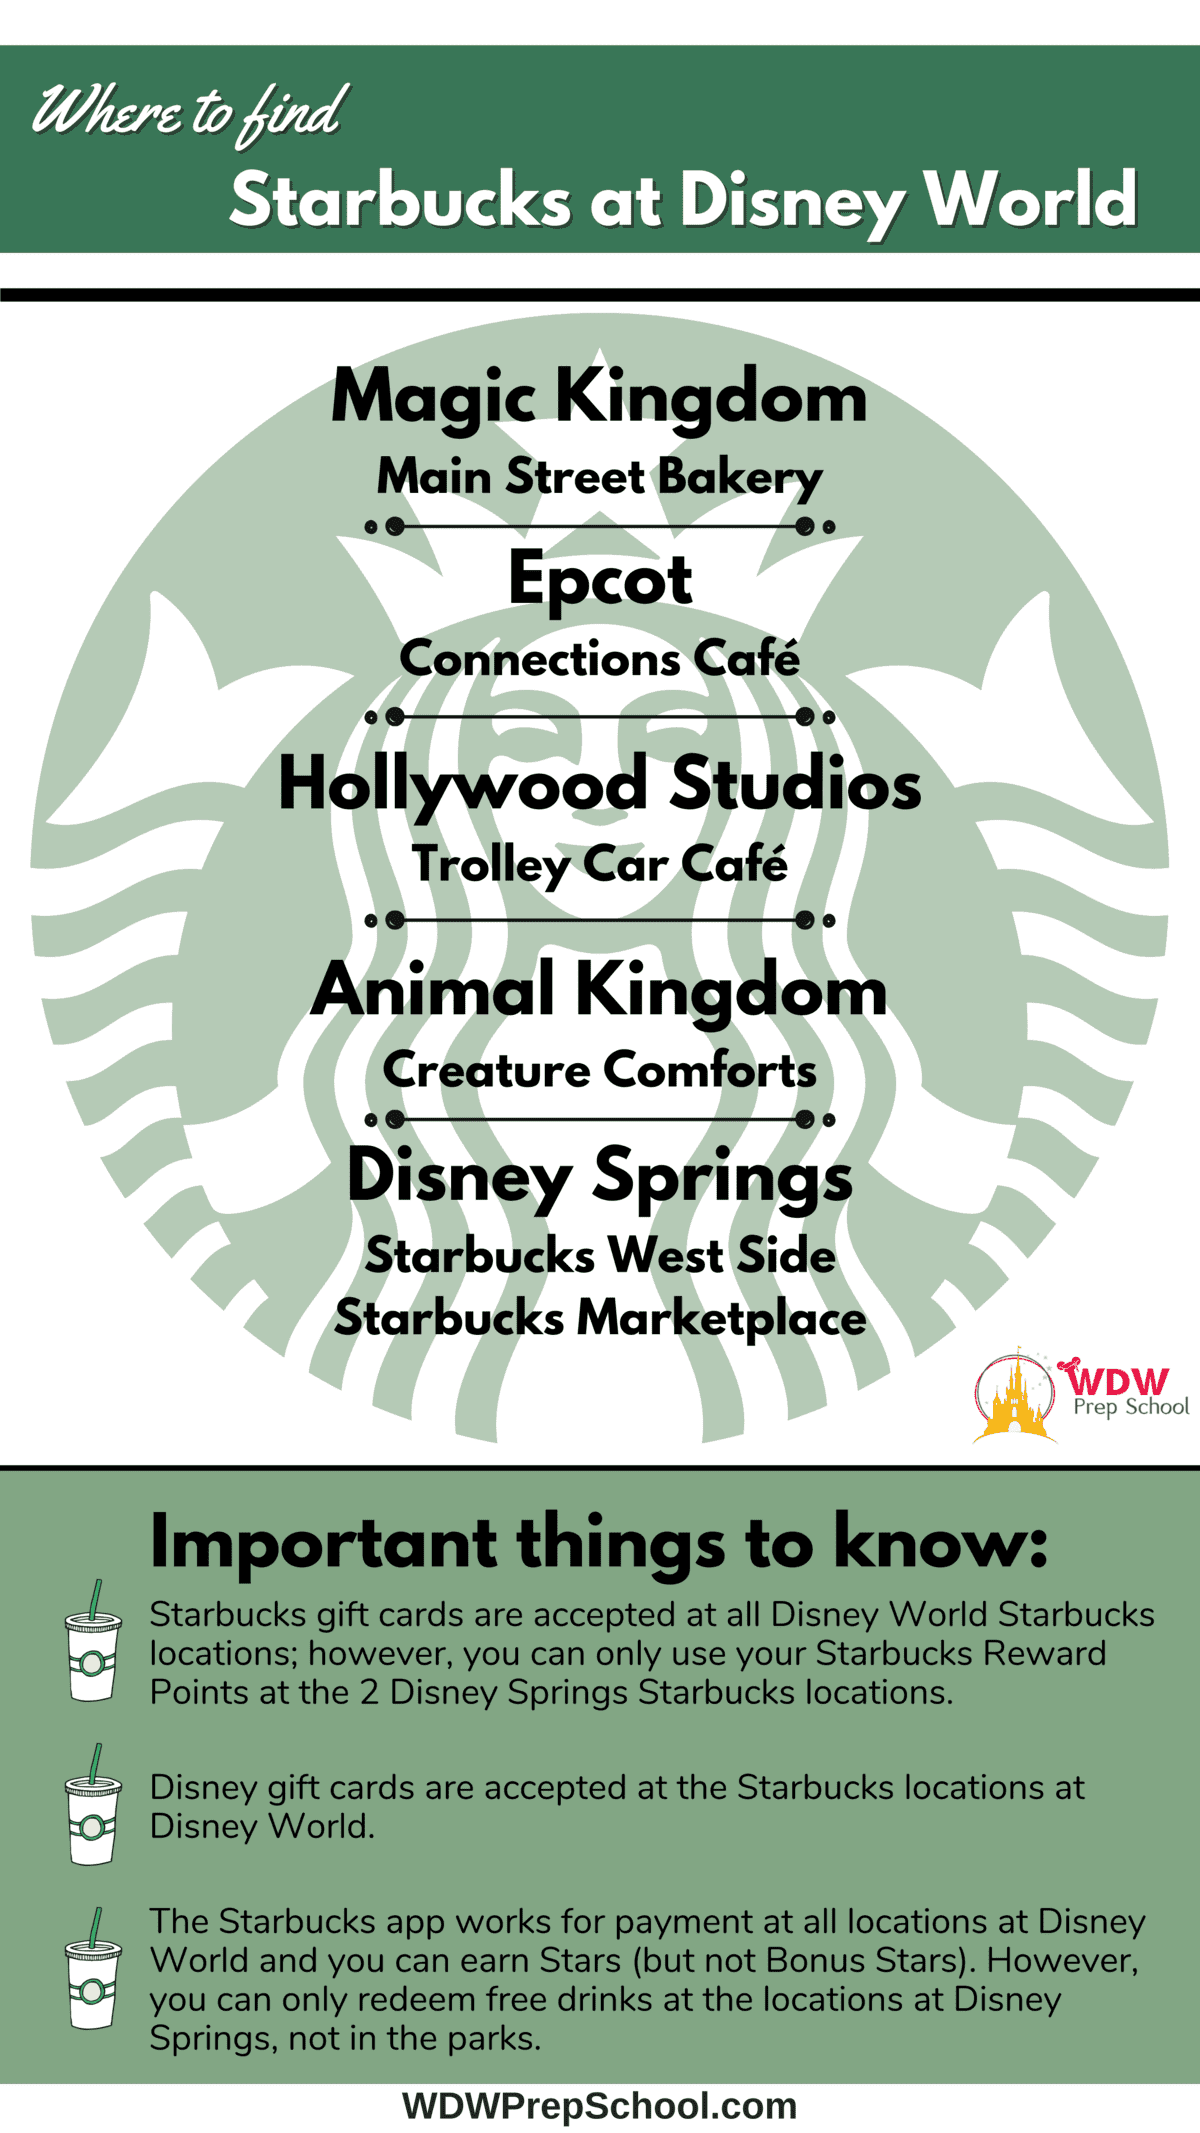 https://wdwprepschool.com/wp-content/uploads/starbucks-at-disney-world-here-everything-you-need-to-know-1.png.webp